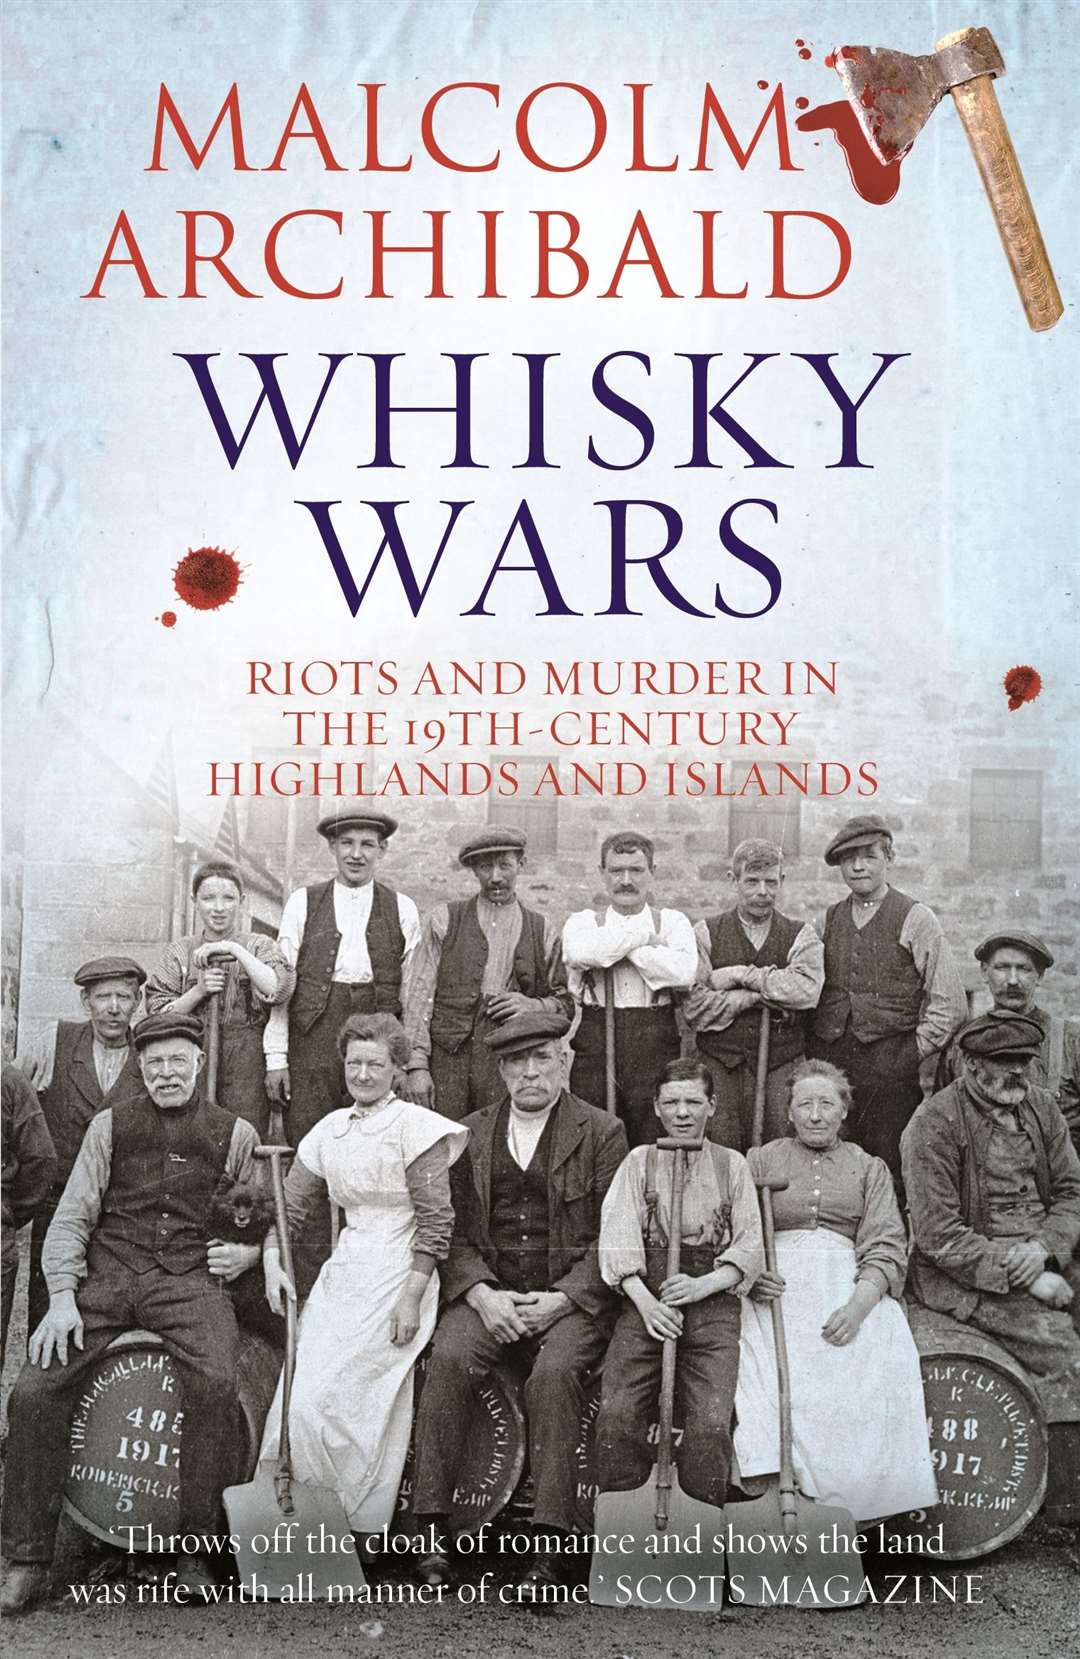 Whisky Wars will appeal to history buffs and true crime fans.